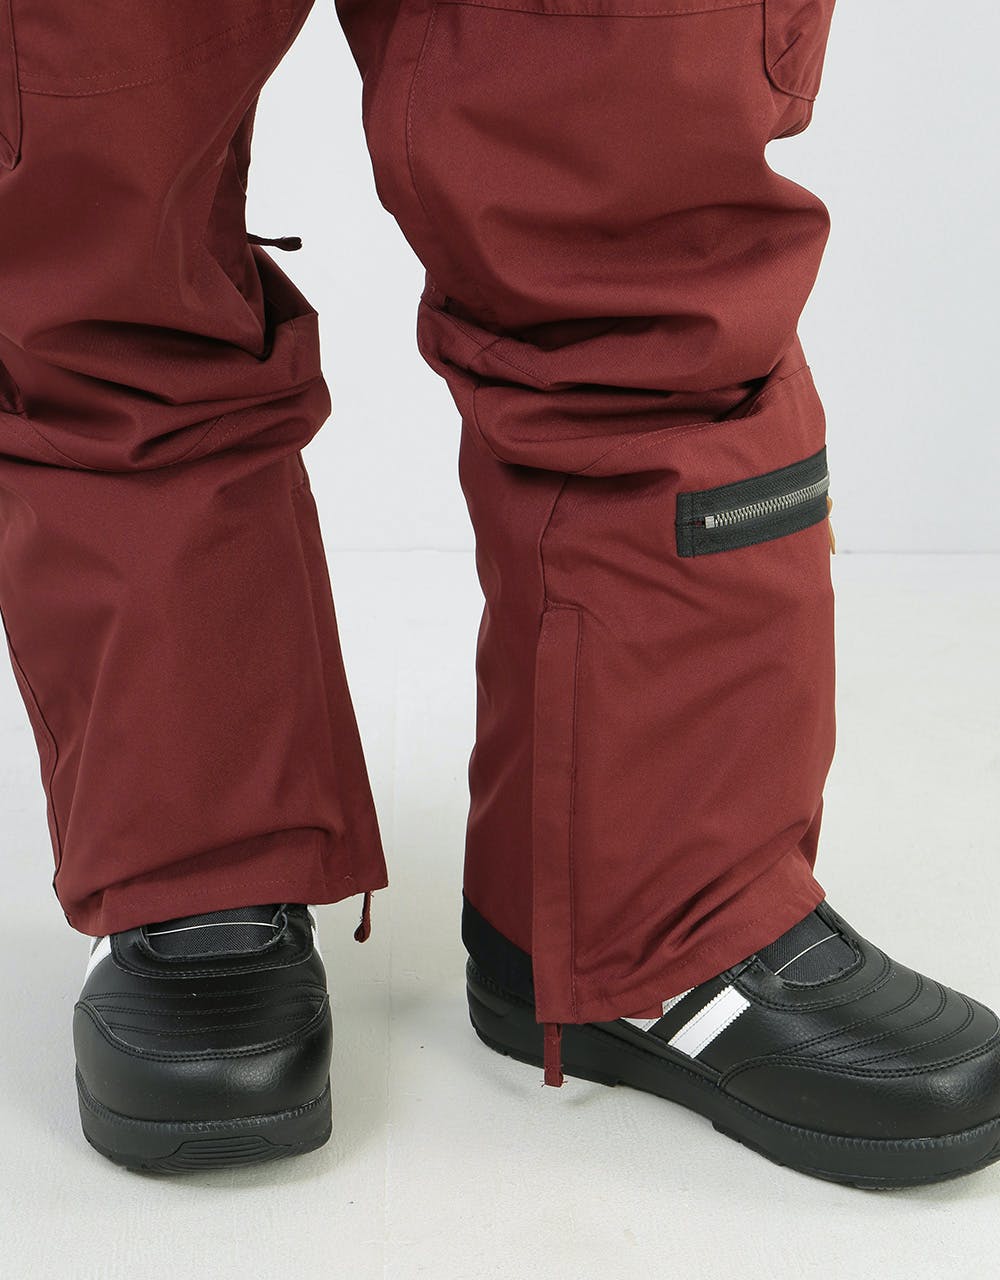 Sessions Squadron Snowboard Pants - Maroon 